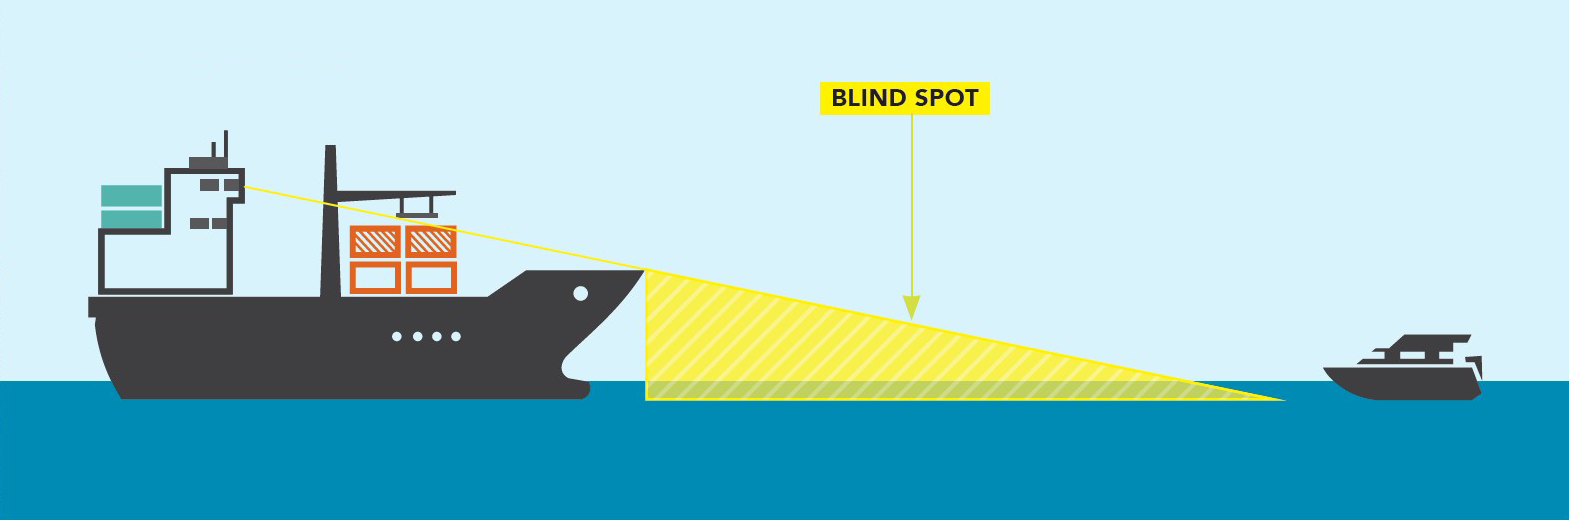 A large commercial vessel on the left and a small pleasure craft on the right with an area that shows the large vessel’s blind spot between them.